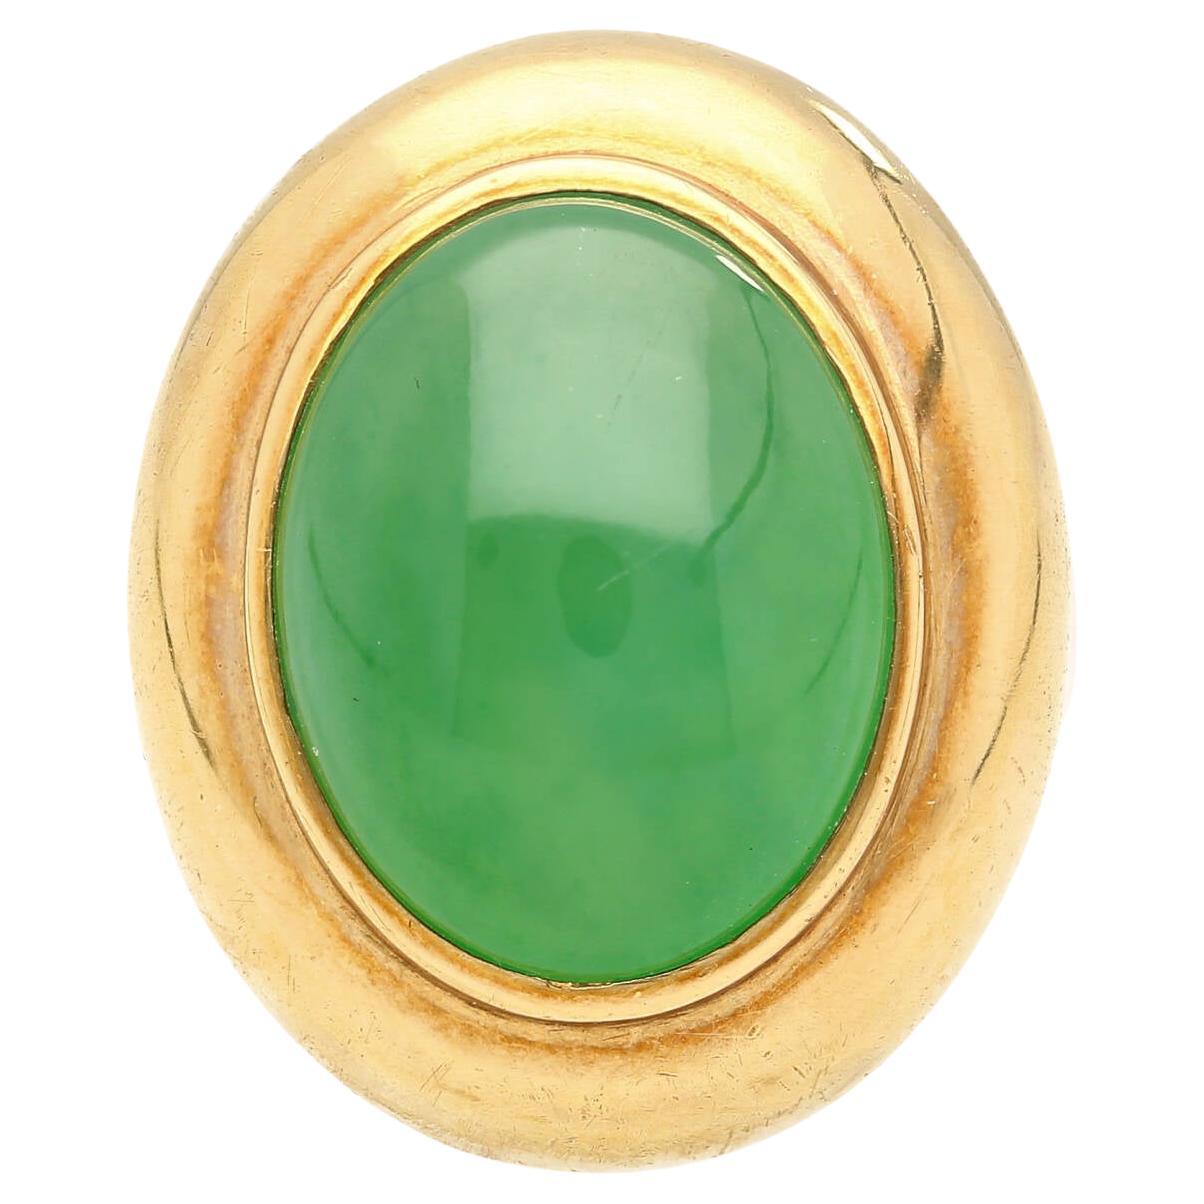 This ring boasts a beautiful cabochon cut, oval-shaped grade 